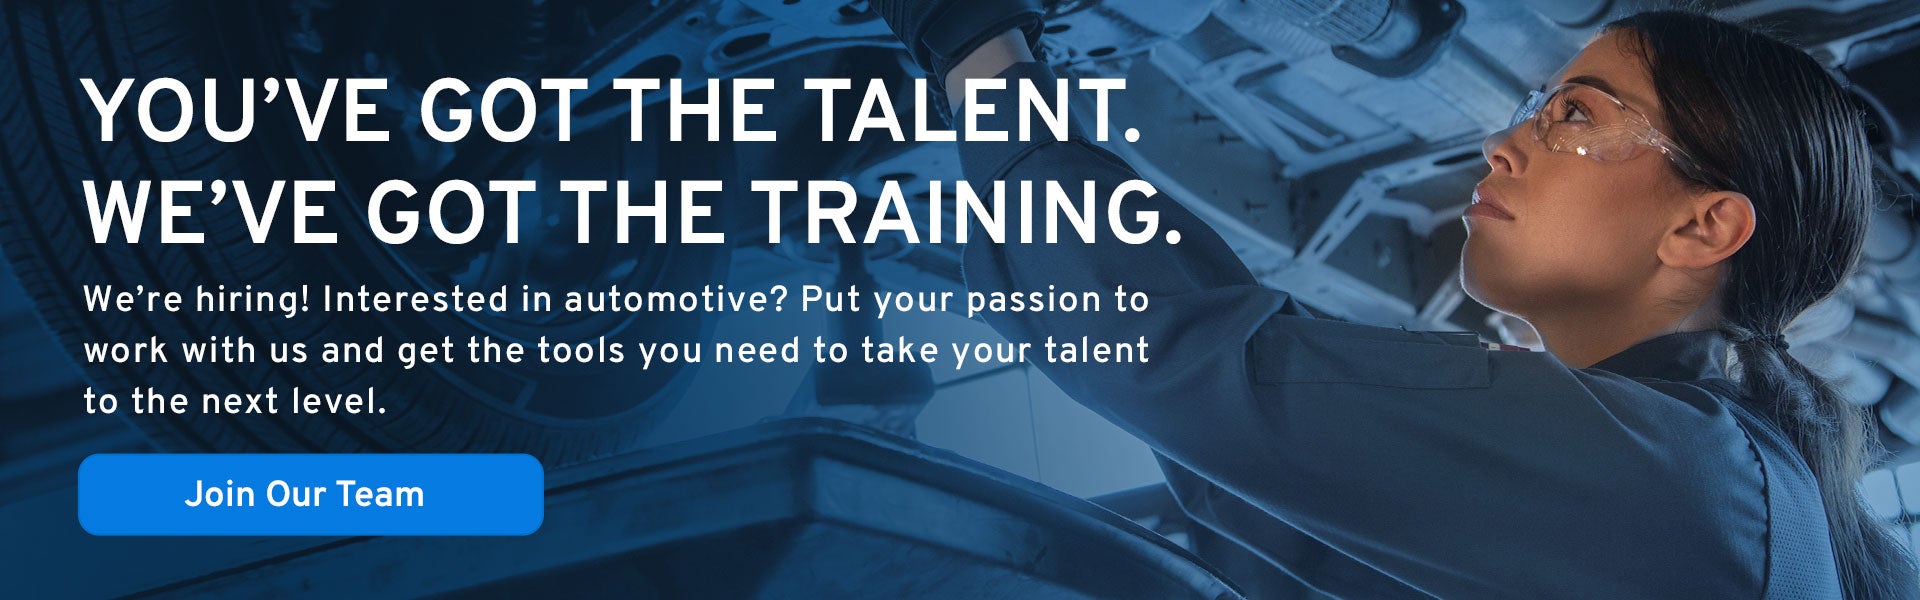 You've got the talent. We've got the training.